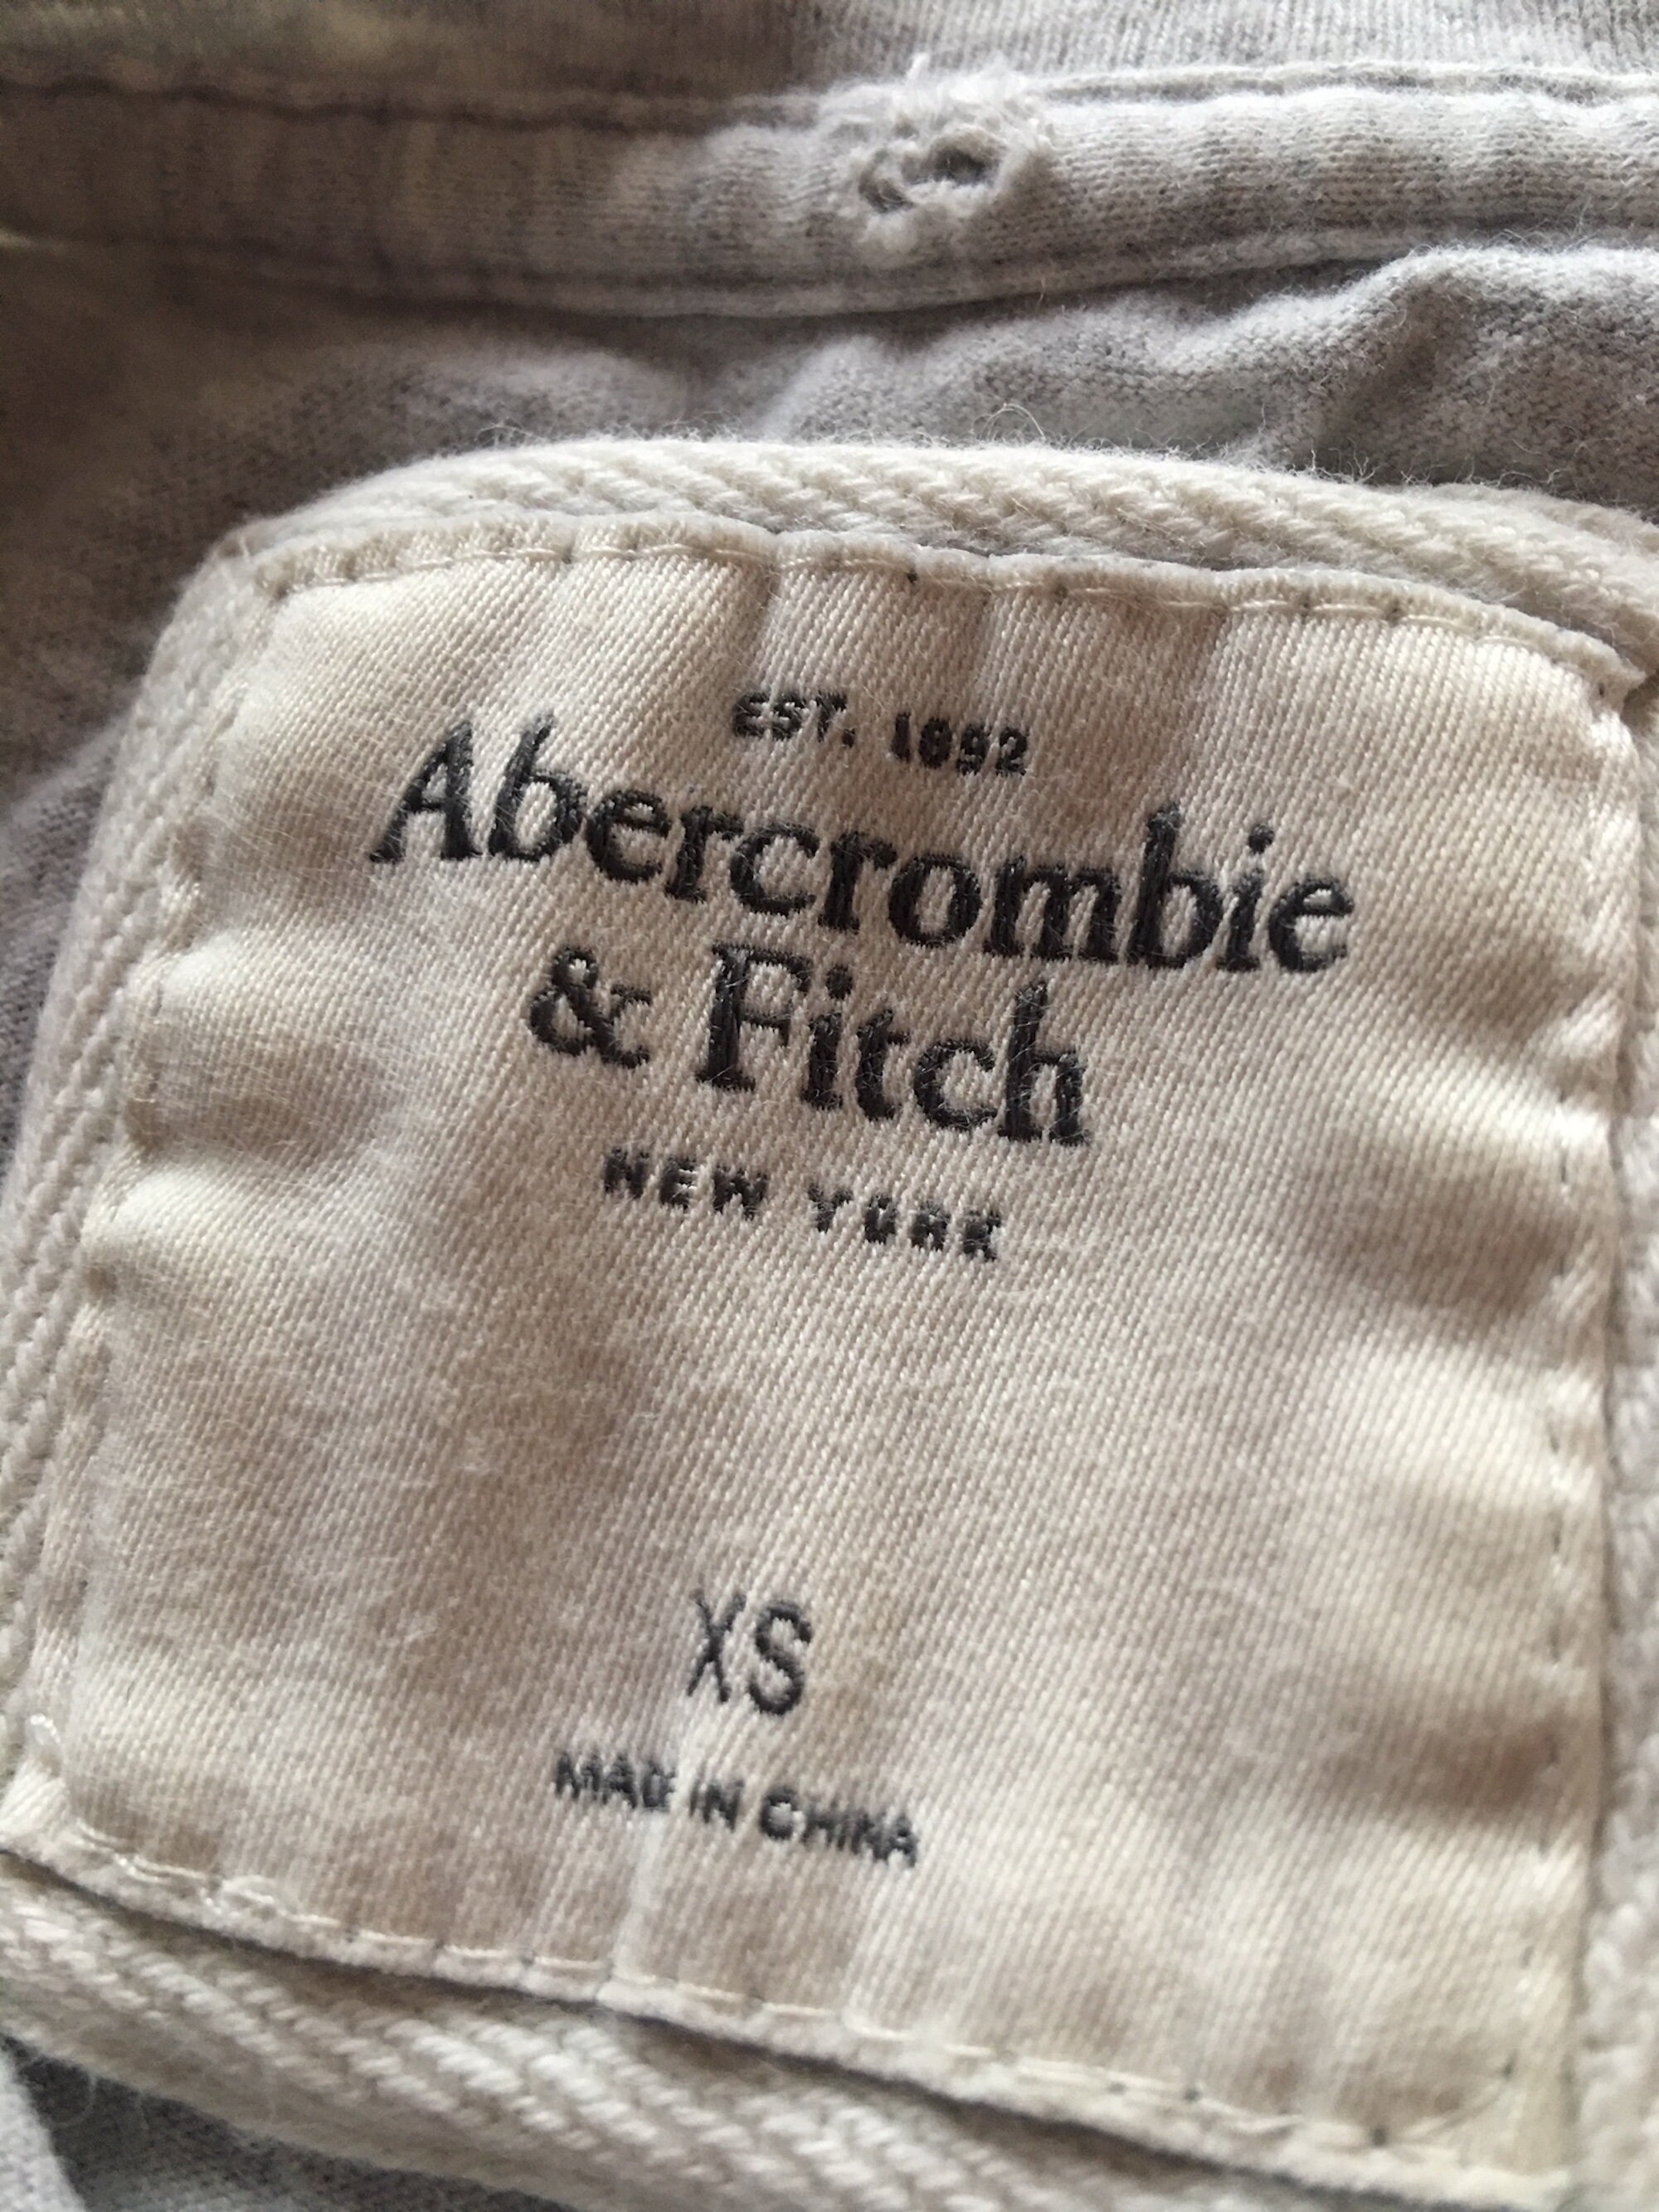 1970s Vintage Exclusive NY Abercrombie & Fitch T-shirt - Etsy